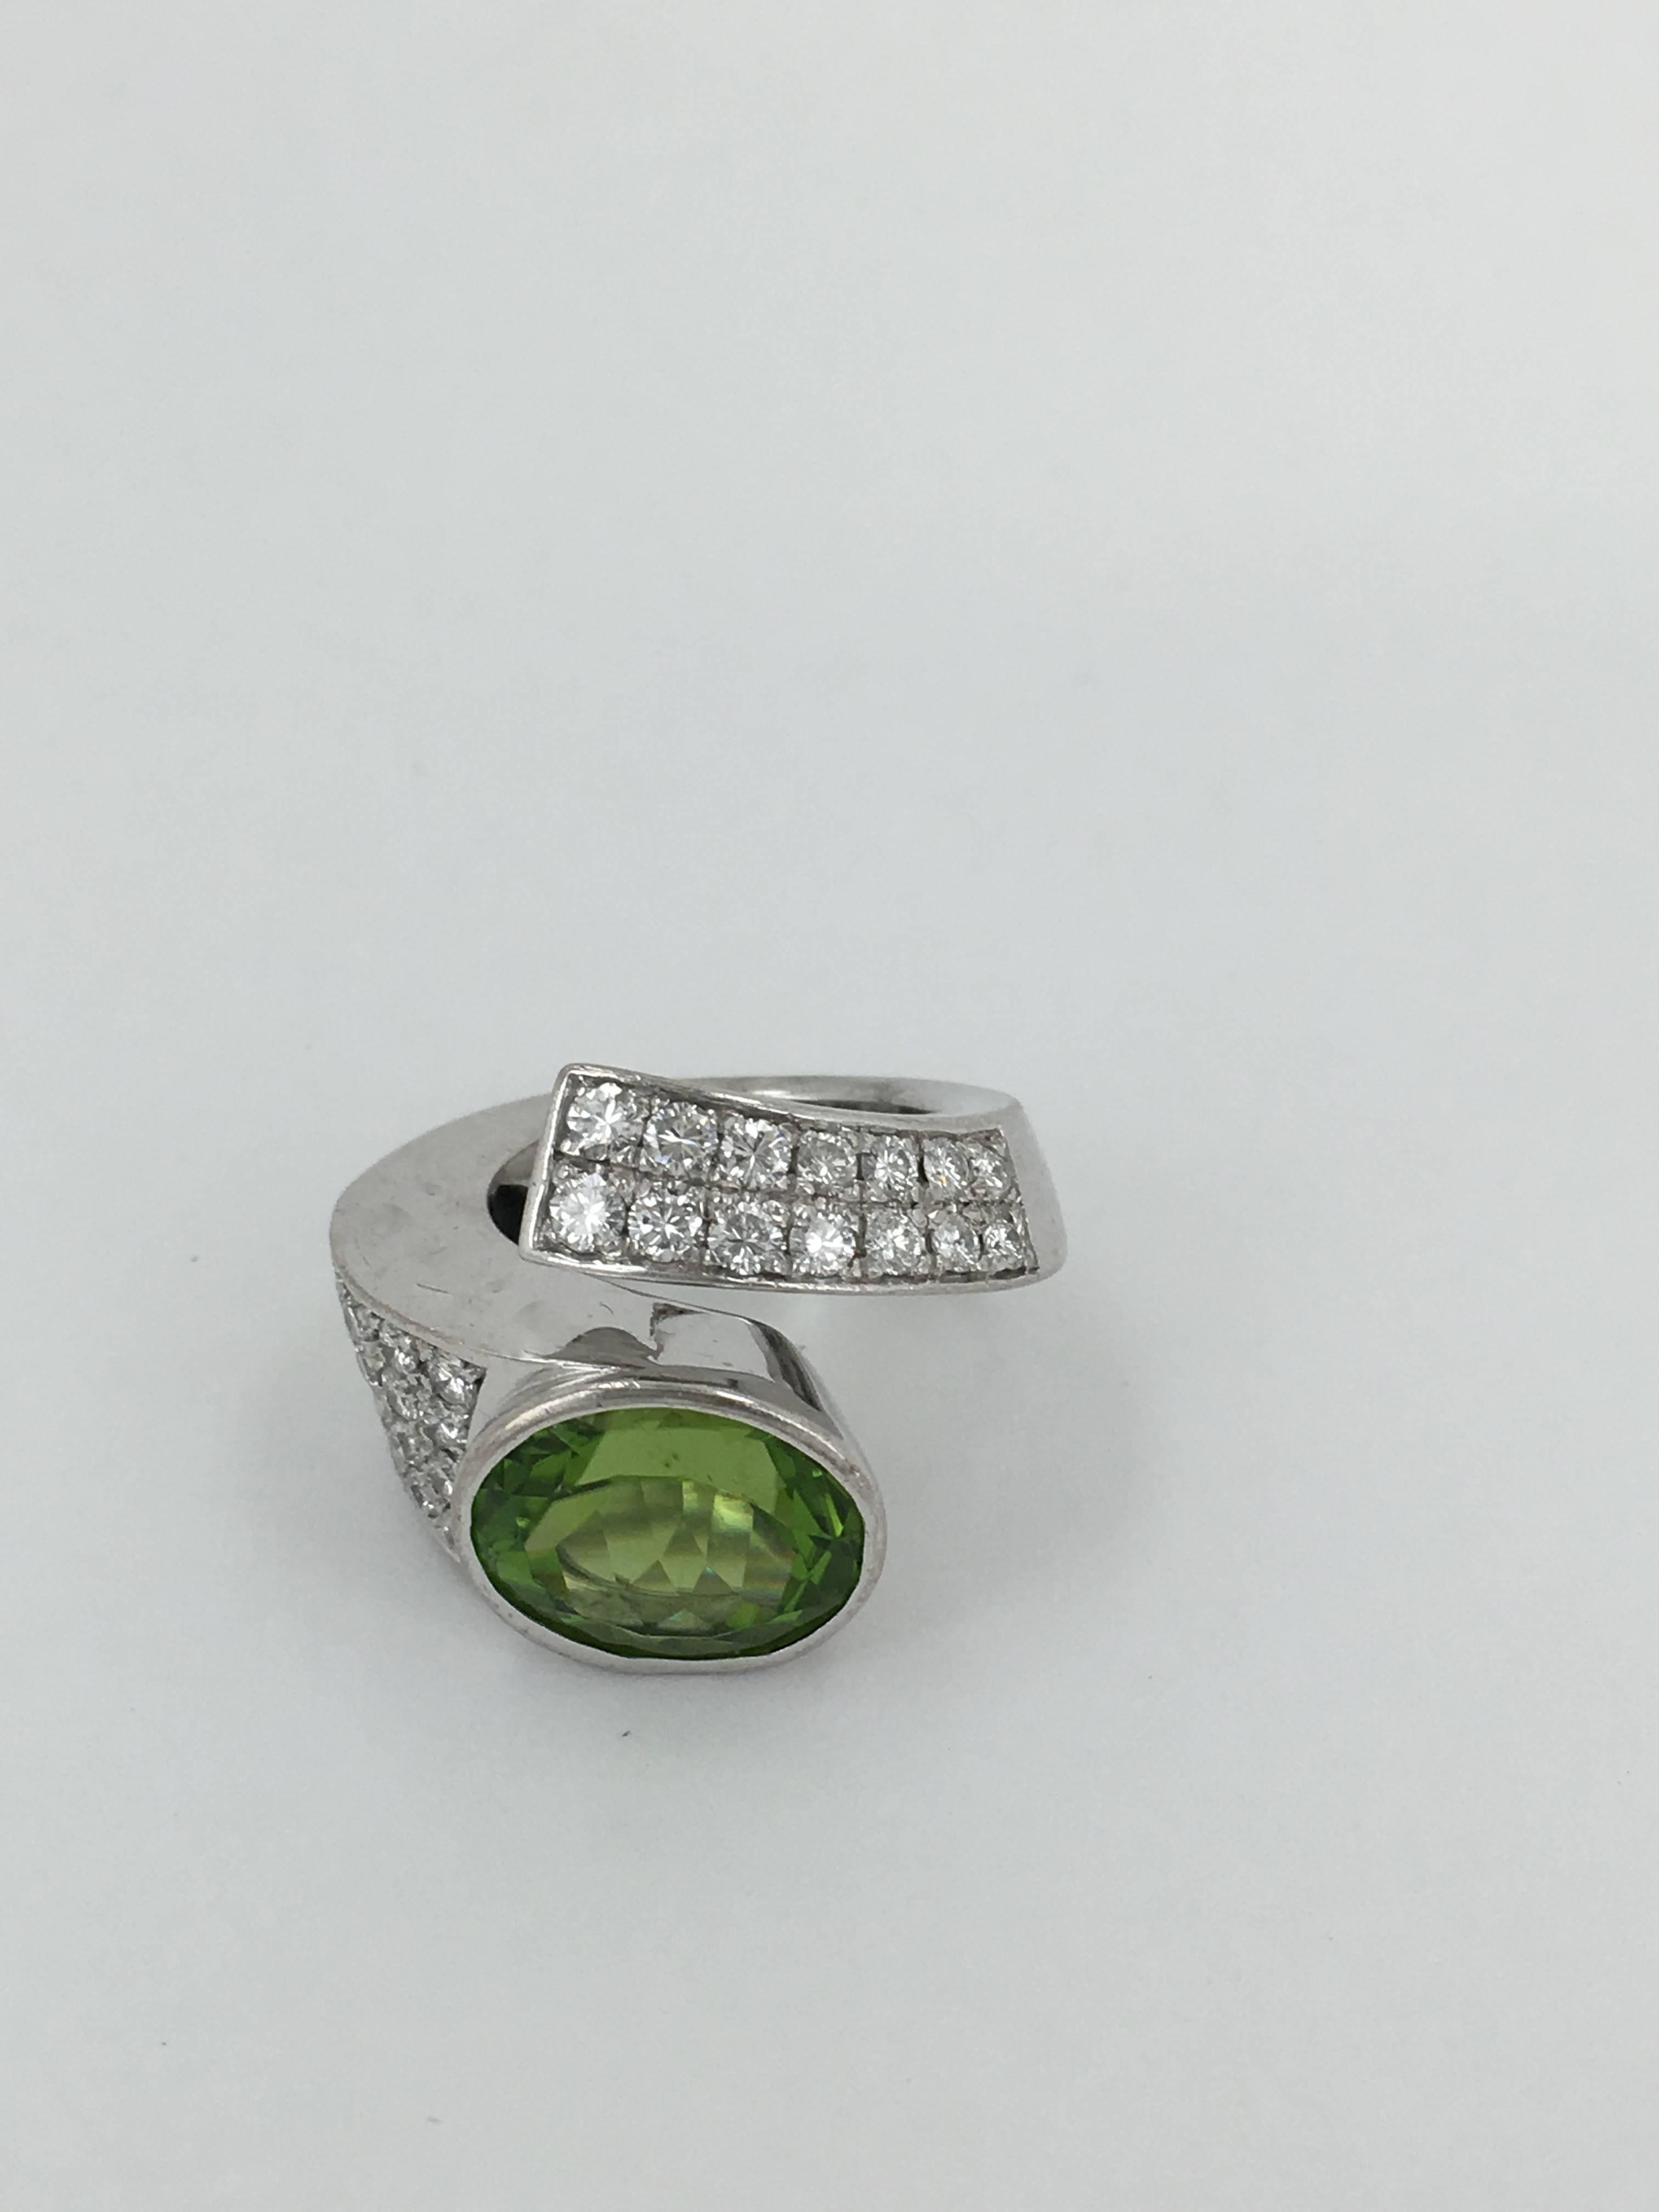 Peridot Approx 15cts set on 18ct White Gold with diamonds APPROX 3 CTS Ring
made by Wiemann 
A true statement ring to wow your friends !!!!!

SIZE UK ( M) SIZE US ( 61/5)